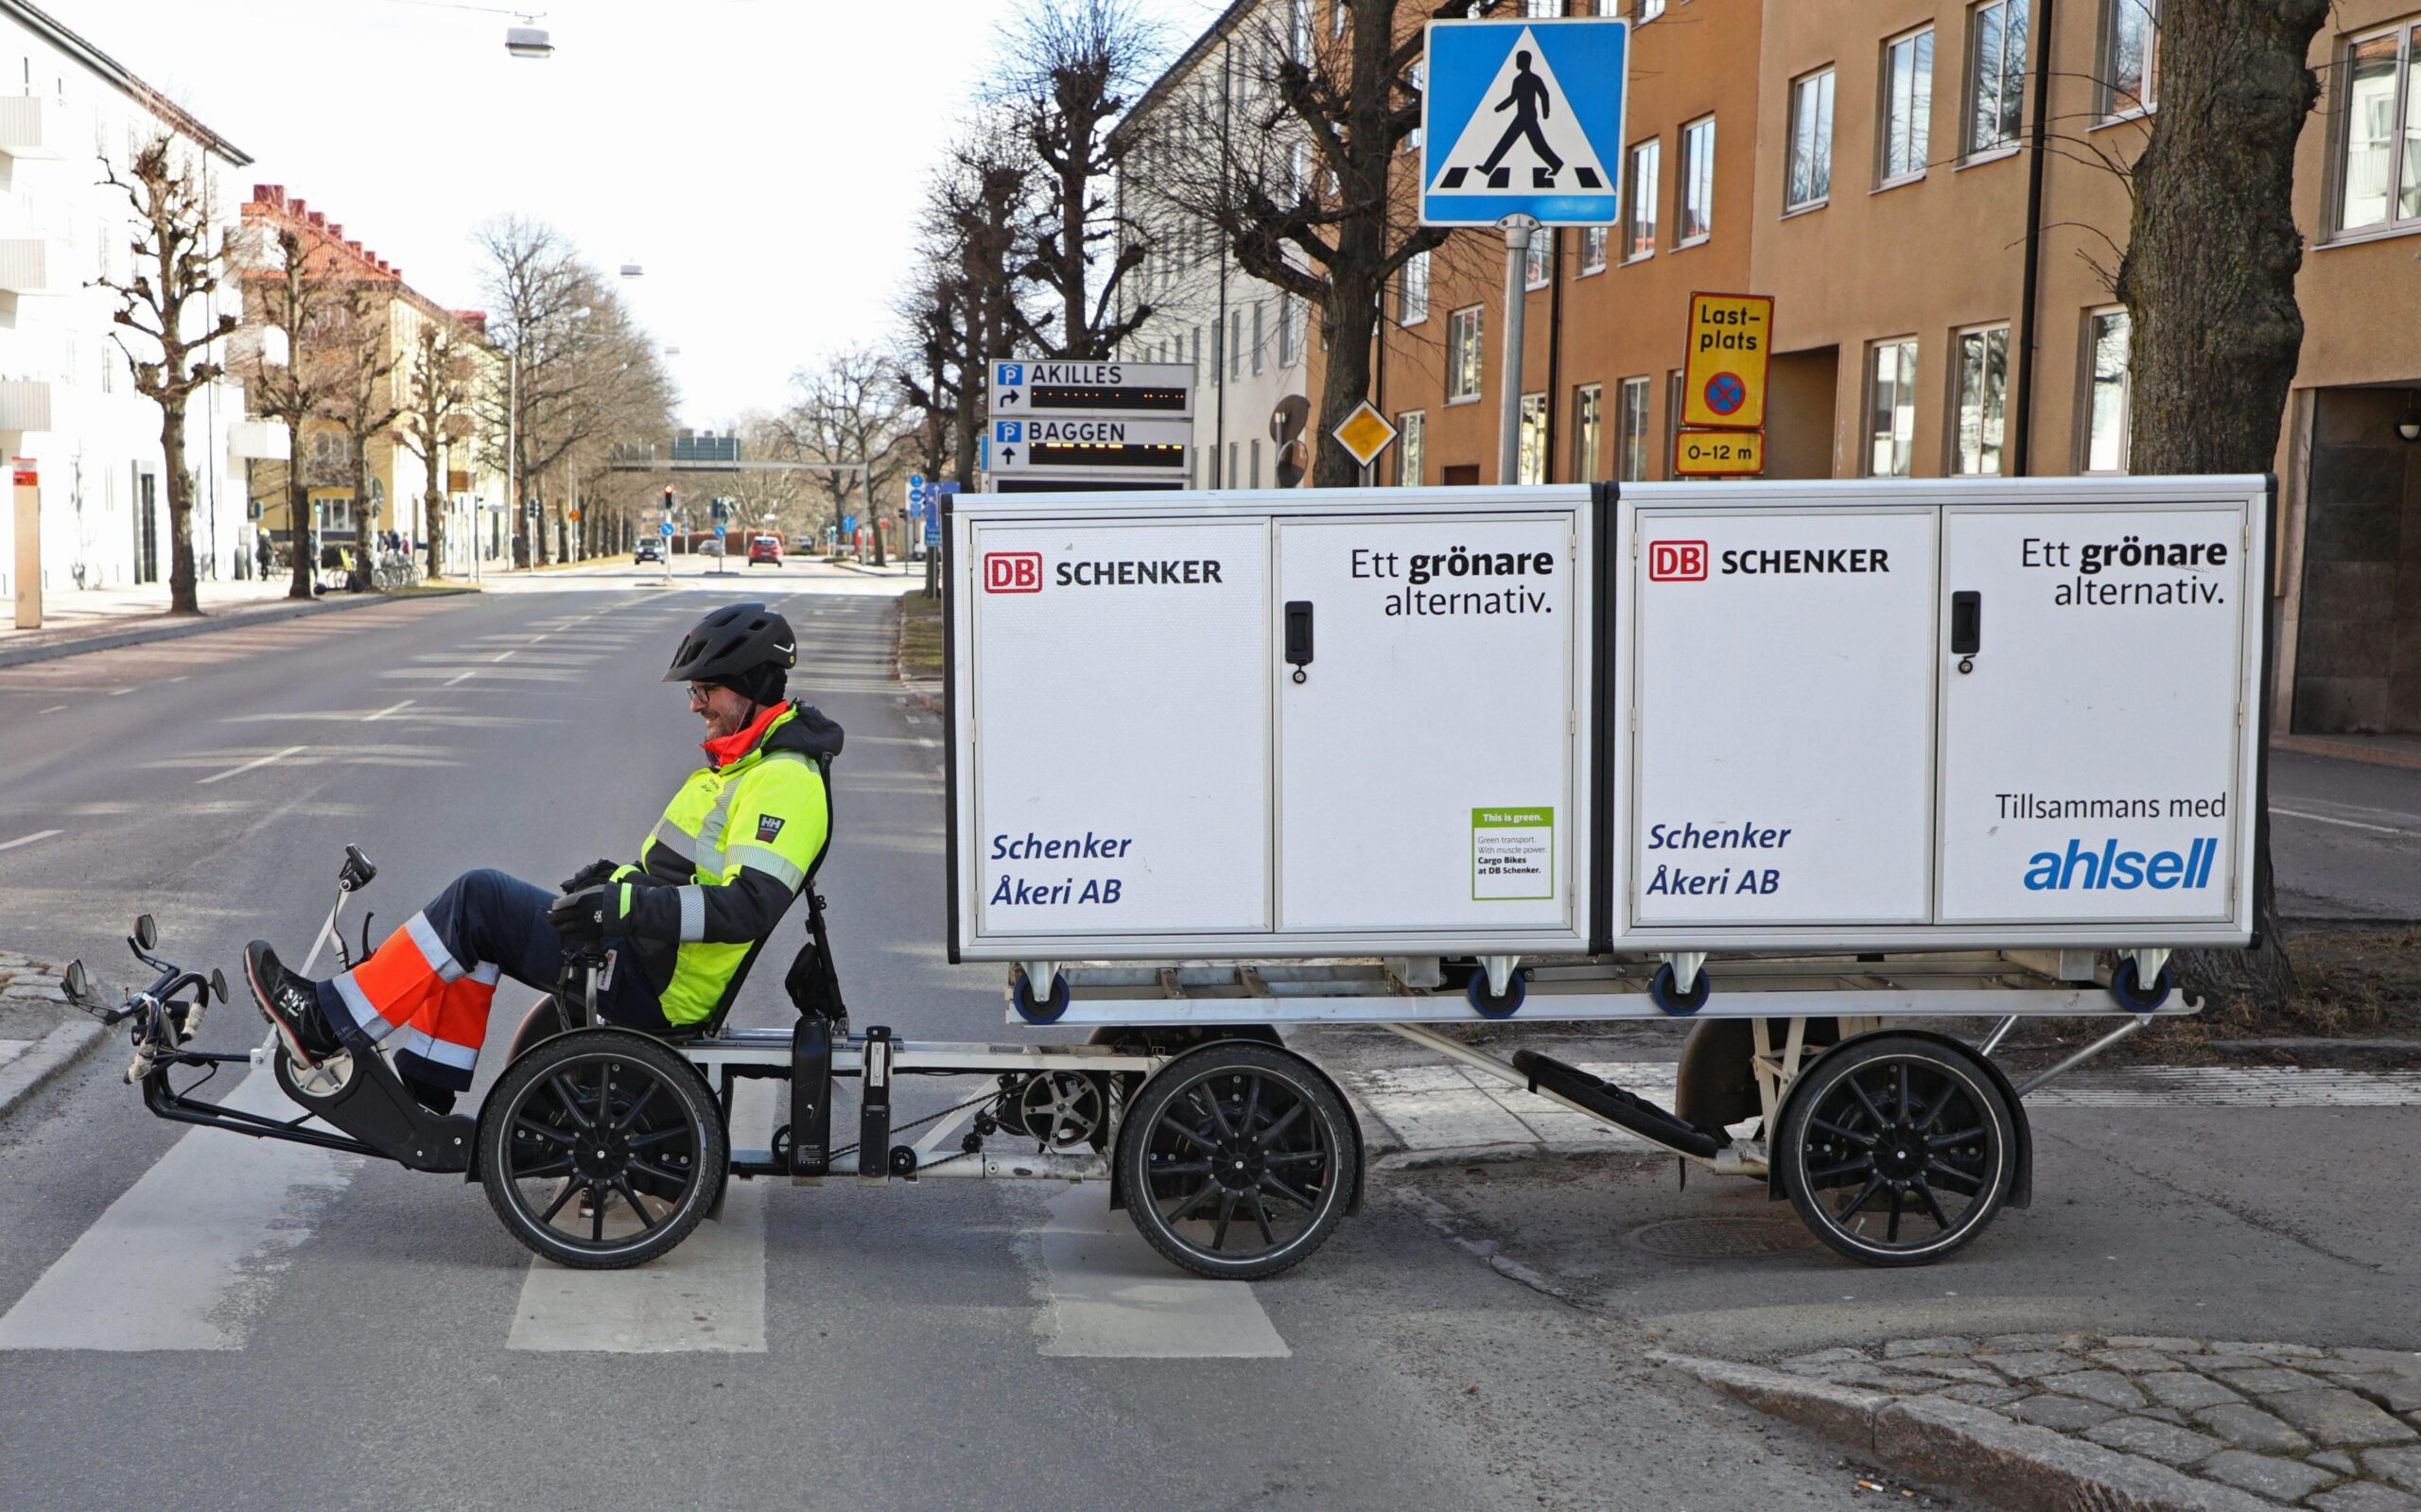 A DB Schenker cargo bike making deliveries in Linkoping, Sweden. The company employs around 70,000 people in 130 countries